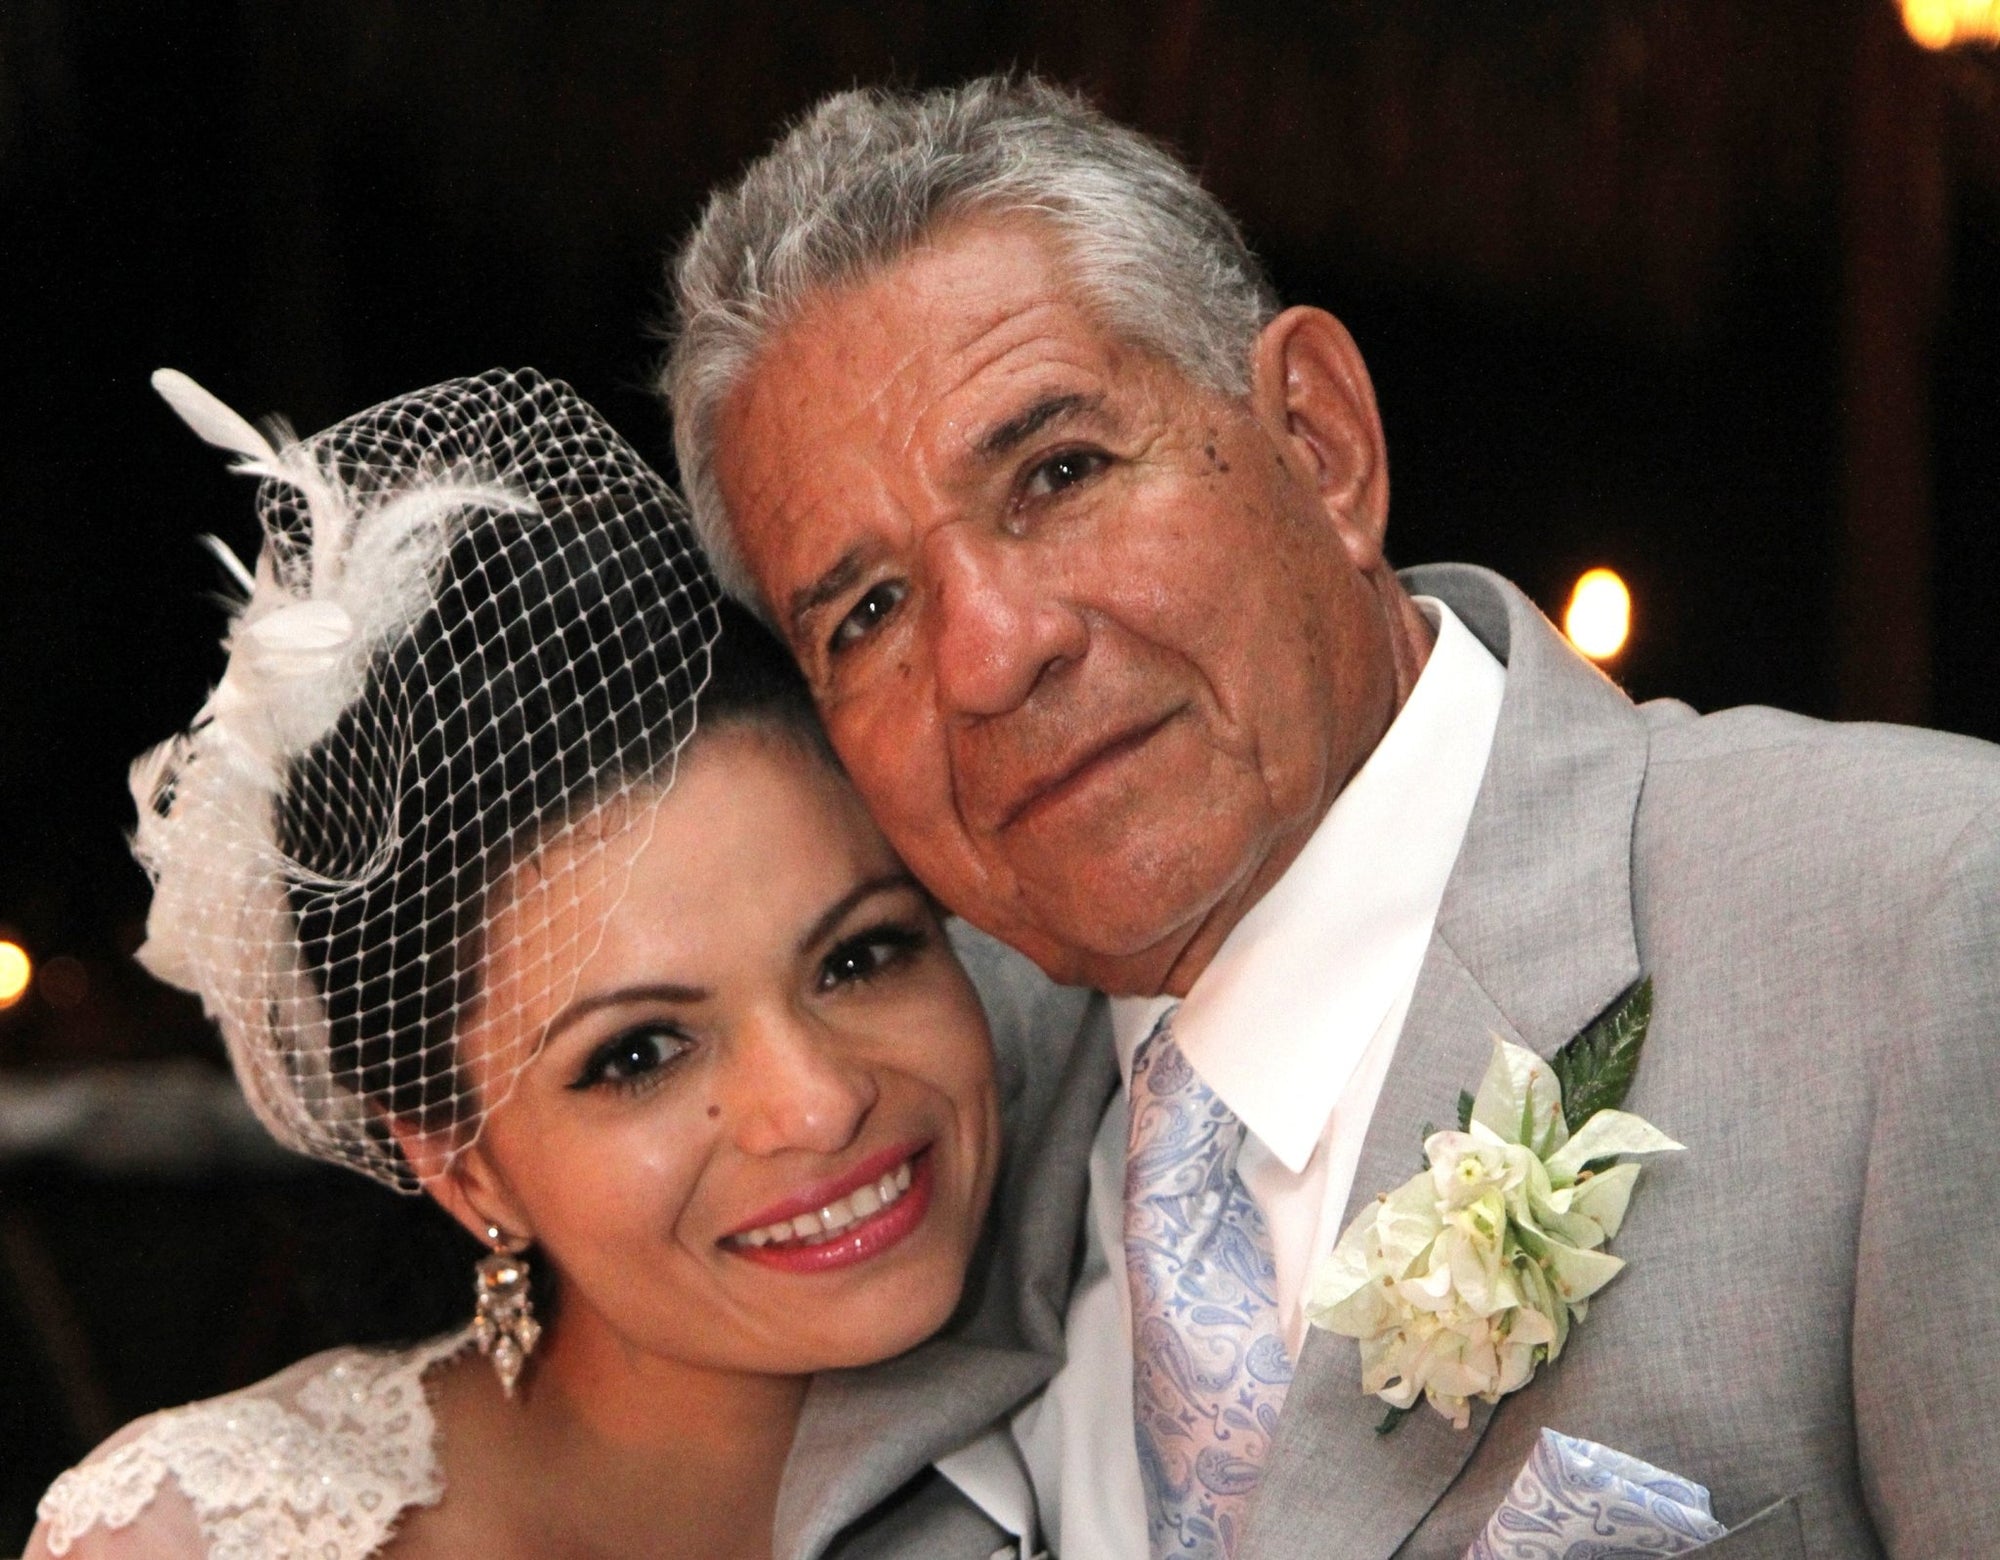 Lessons learned from my father - Stories from 3 Latino entrepreneurs. - Mi LegaSi